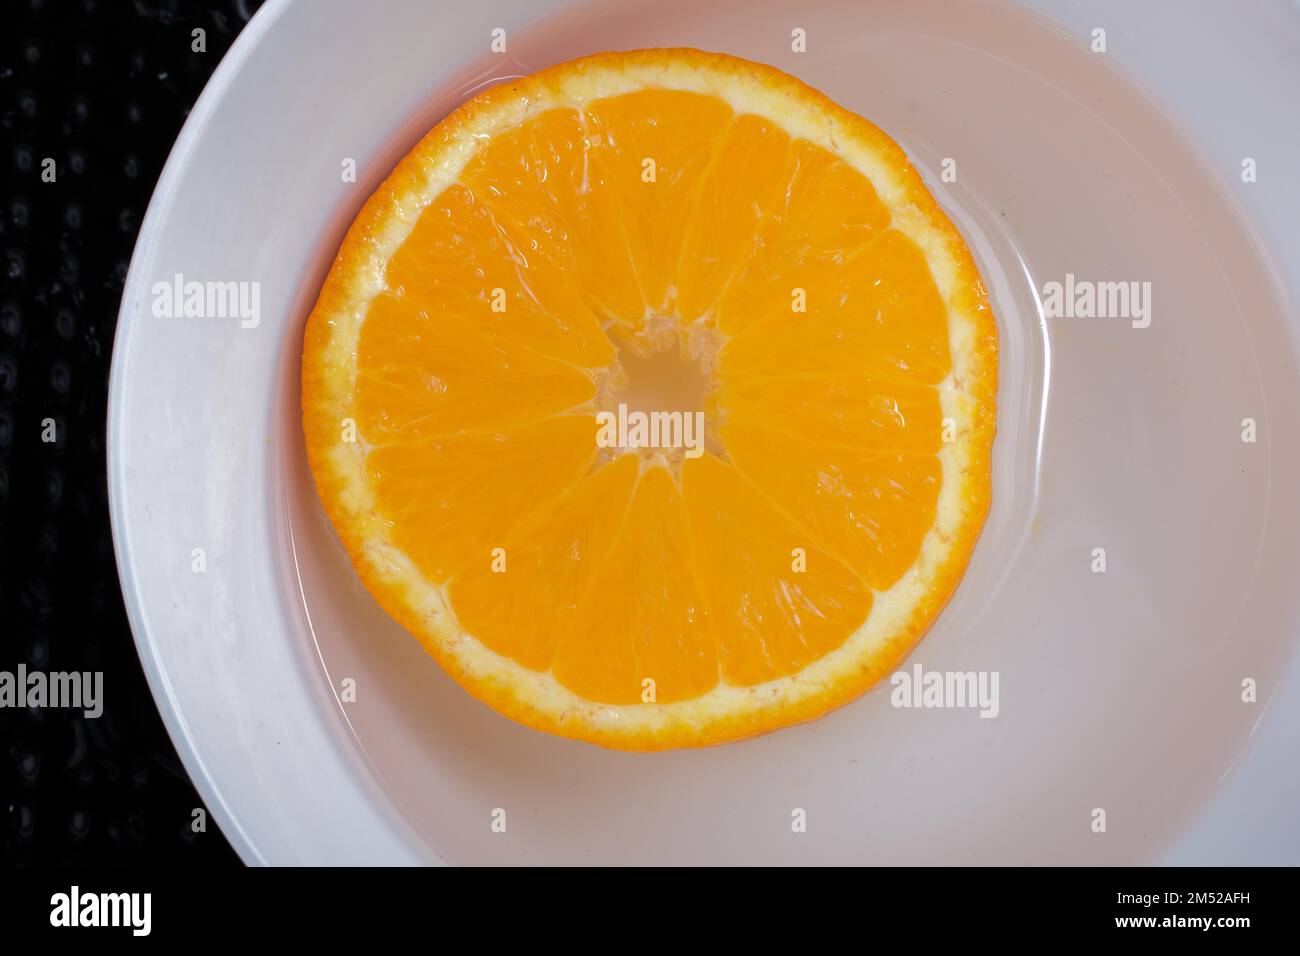 A view of a juicy, sweet and ripe cut orange fruit Stock Photo